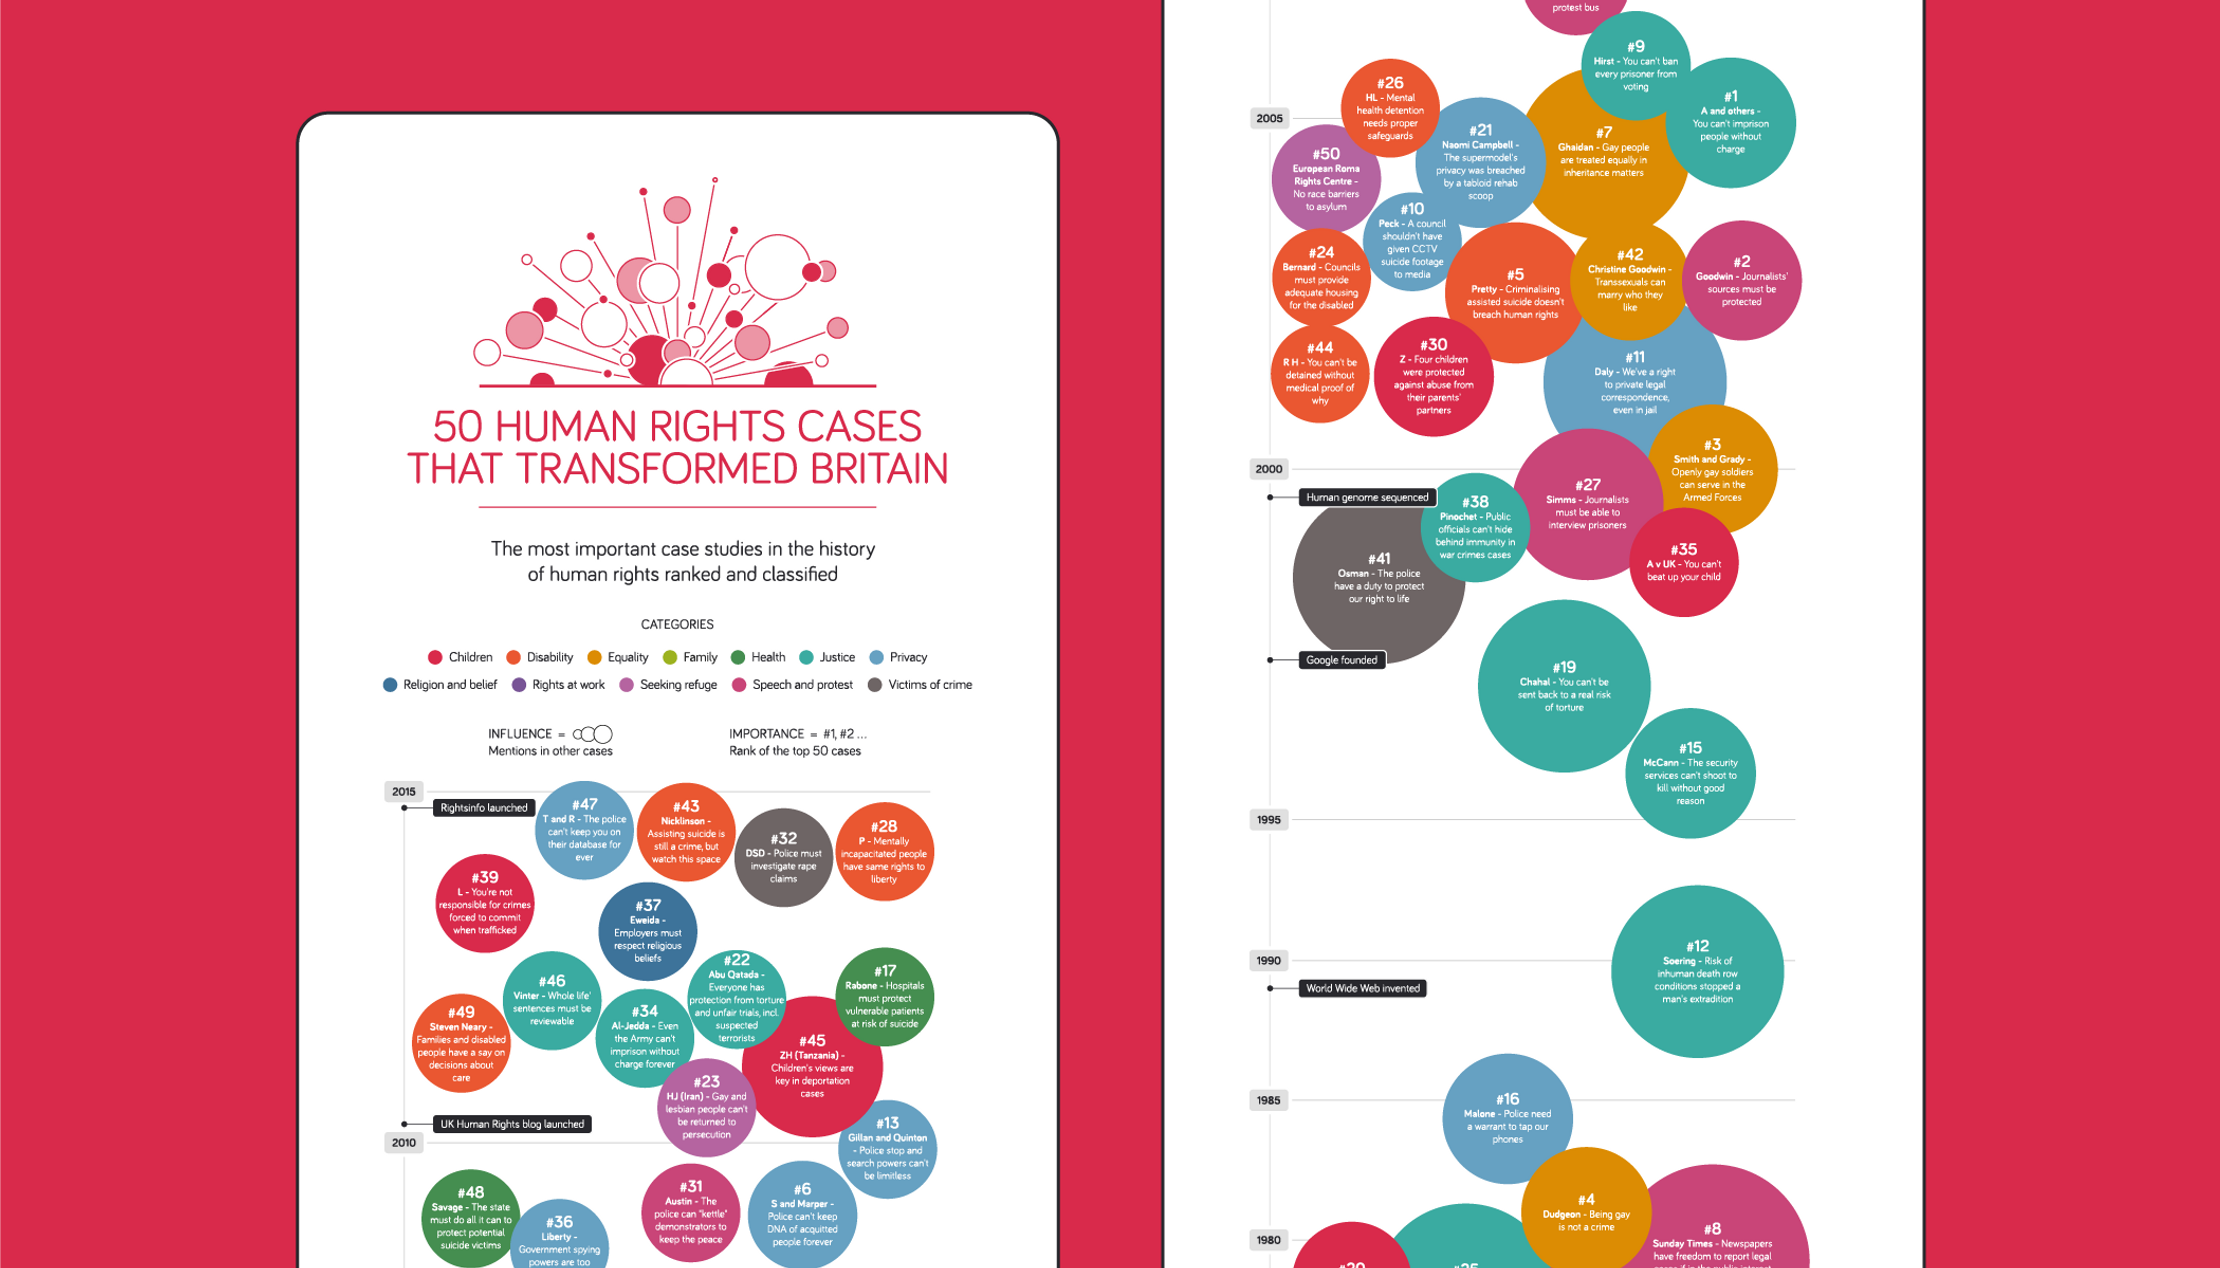 A screenshot from the Human Rights explainers project. It shows a timeline of 50 of the human rights cases that transformed Britain. Each case is represented by a colourful bubble where the colour represents the category of right and the size reflects the case's influence.